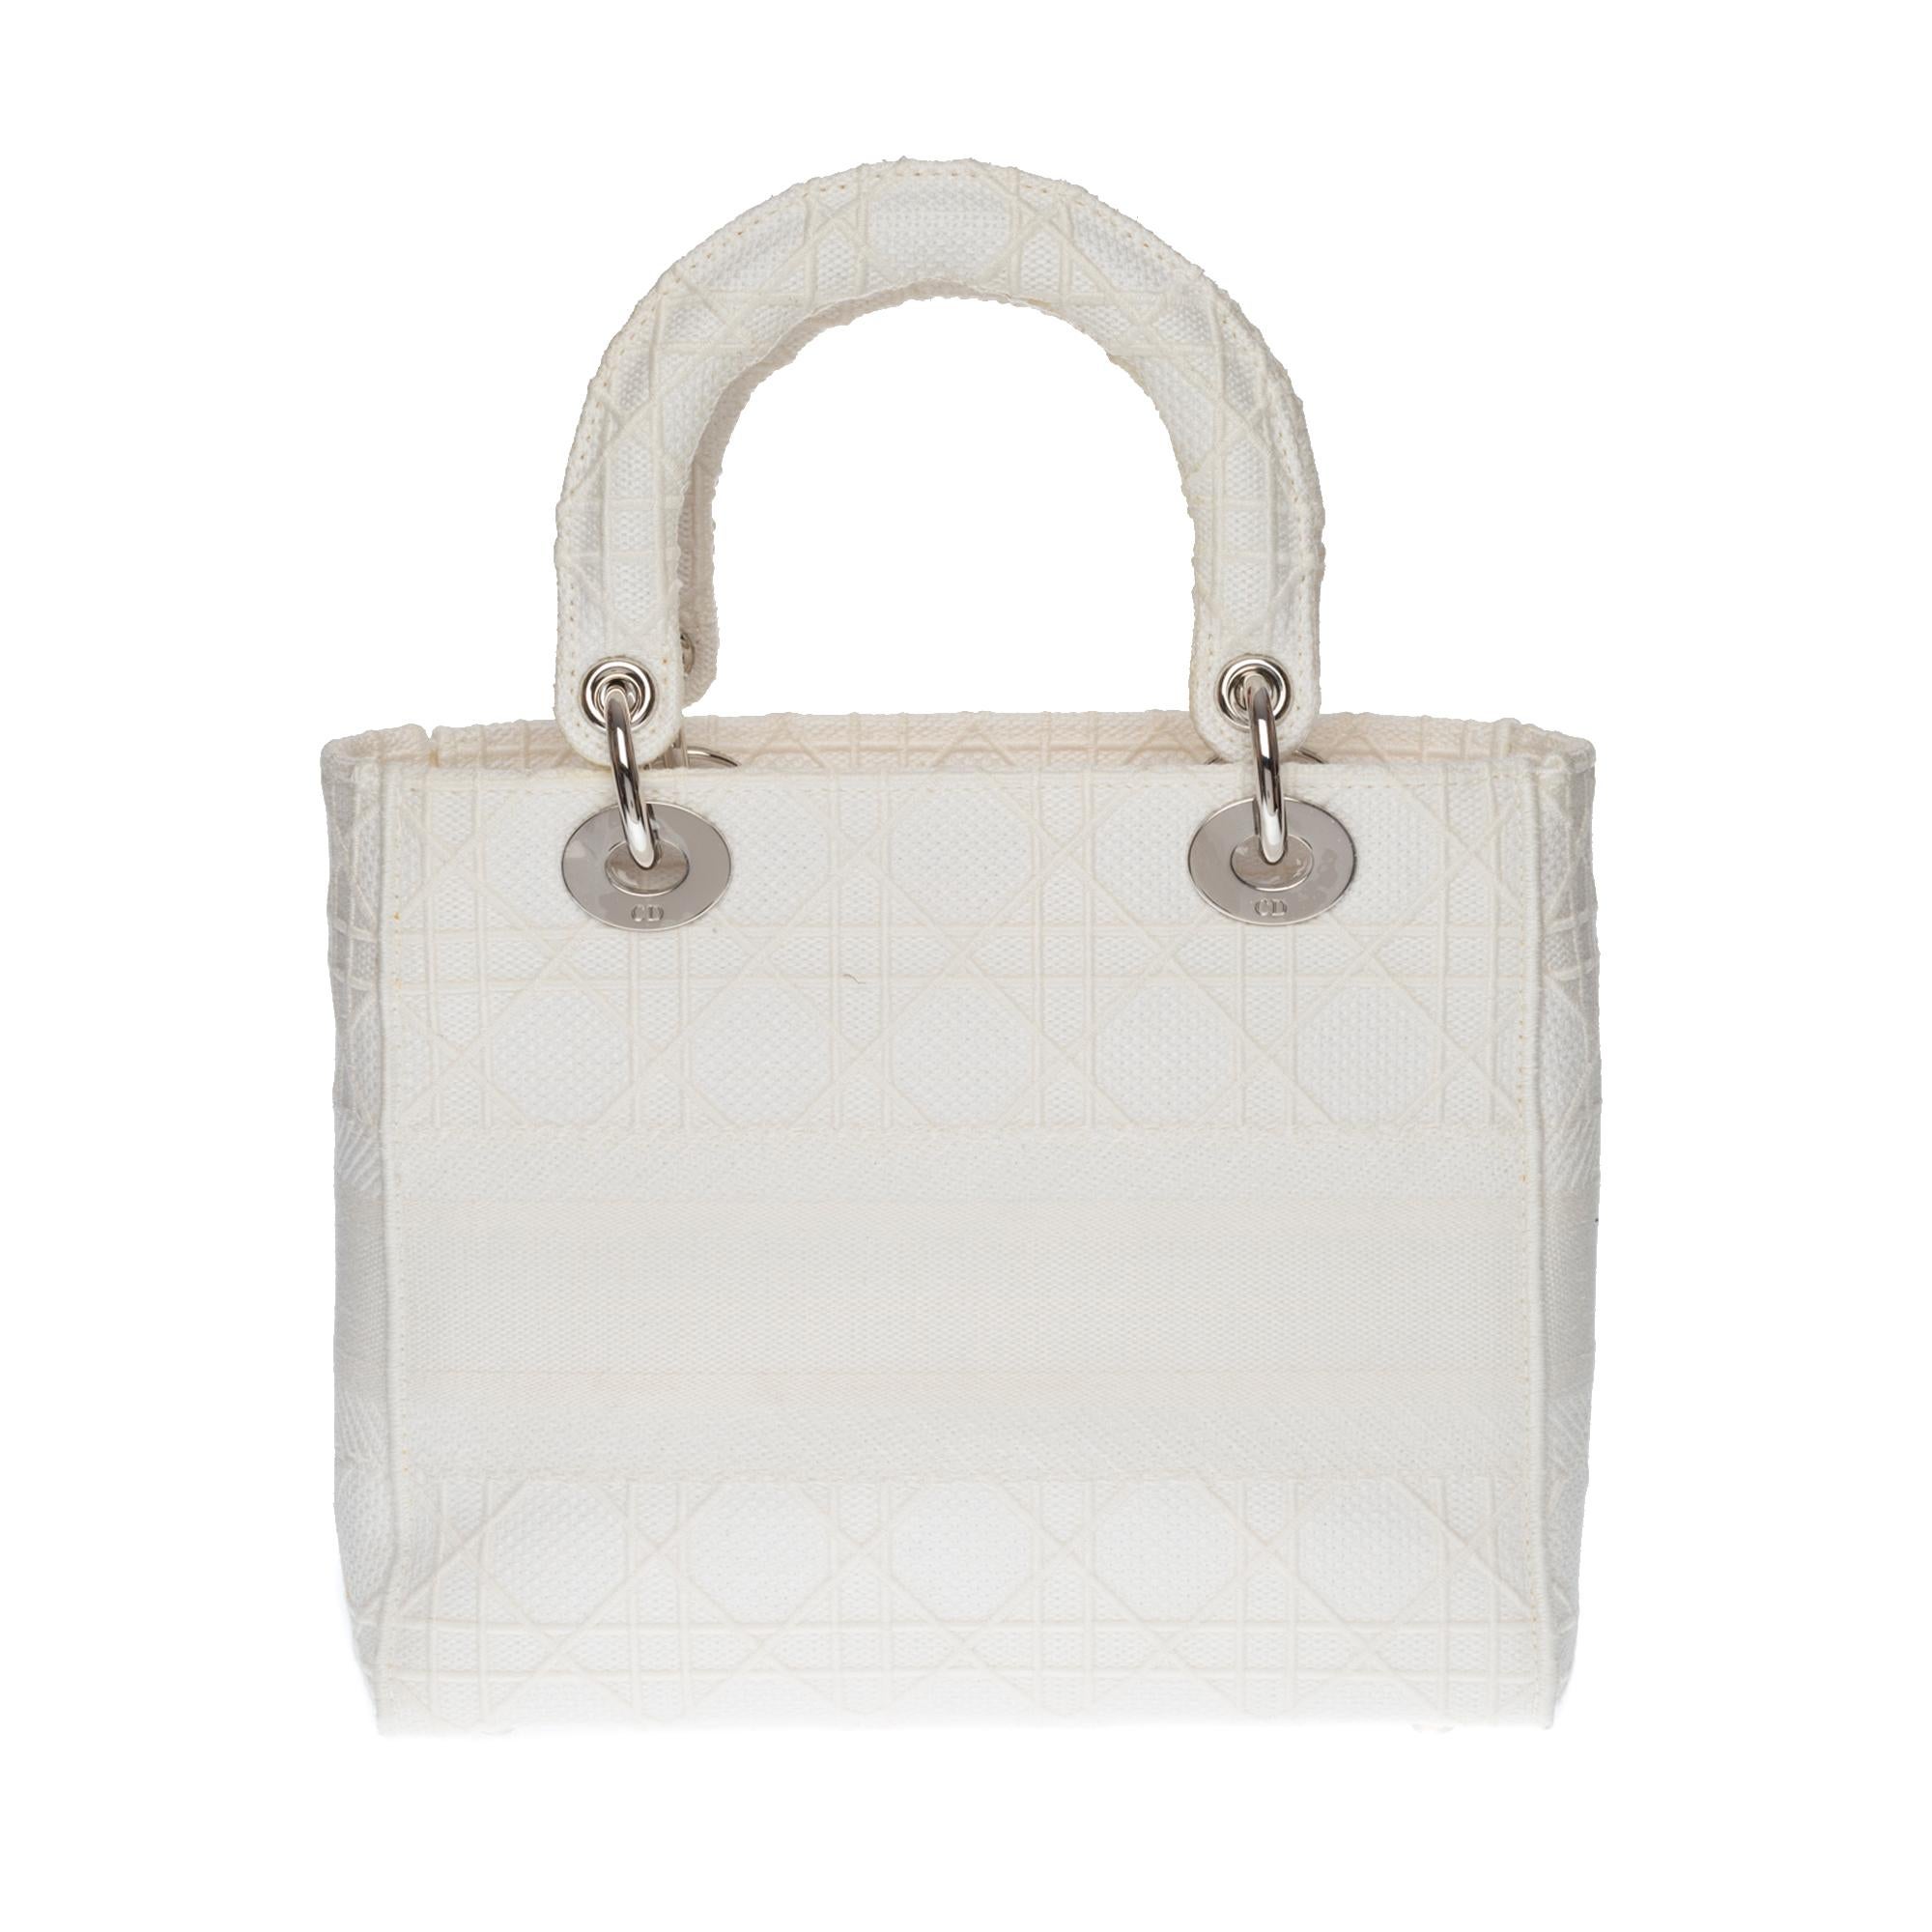 The Lady D-Lite bag perfectly embodies Dior’s vision of elegance and beauty. Refined and feminine, this creation is entirely embroidered with the off-white Cannage motif and enhanced with the CHRISTIAN DIOR signature on the front. The D.I.O.R.